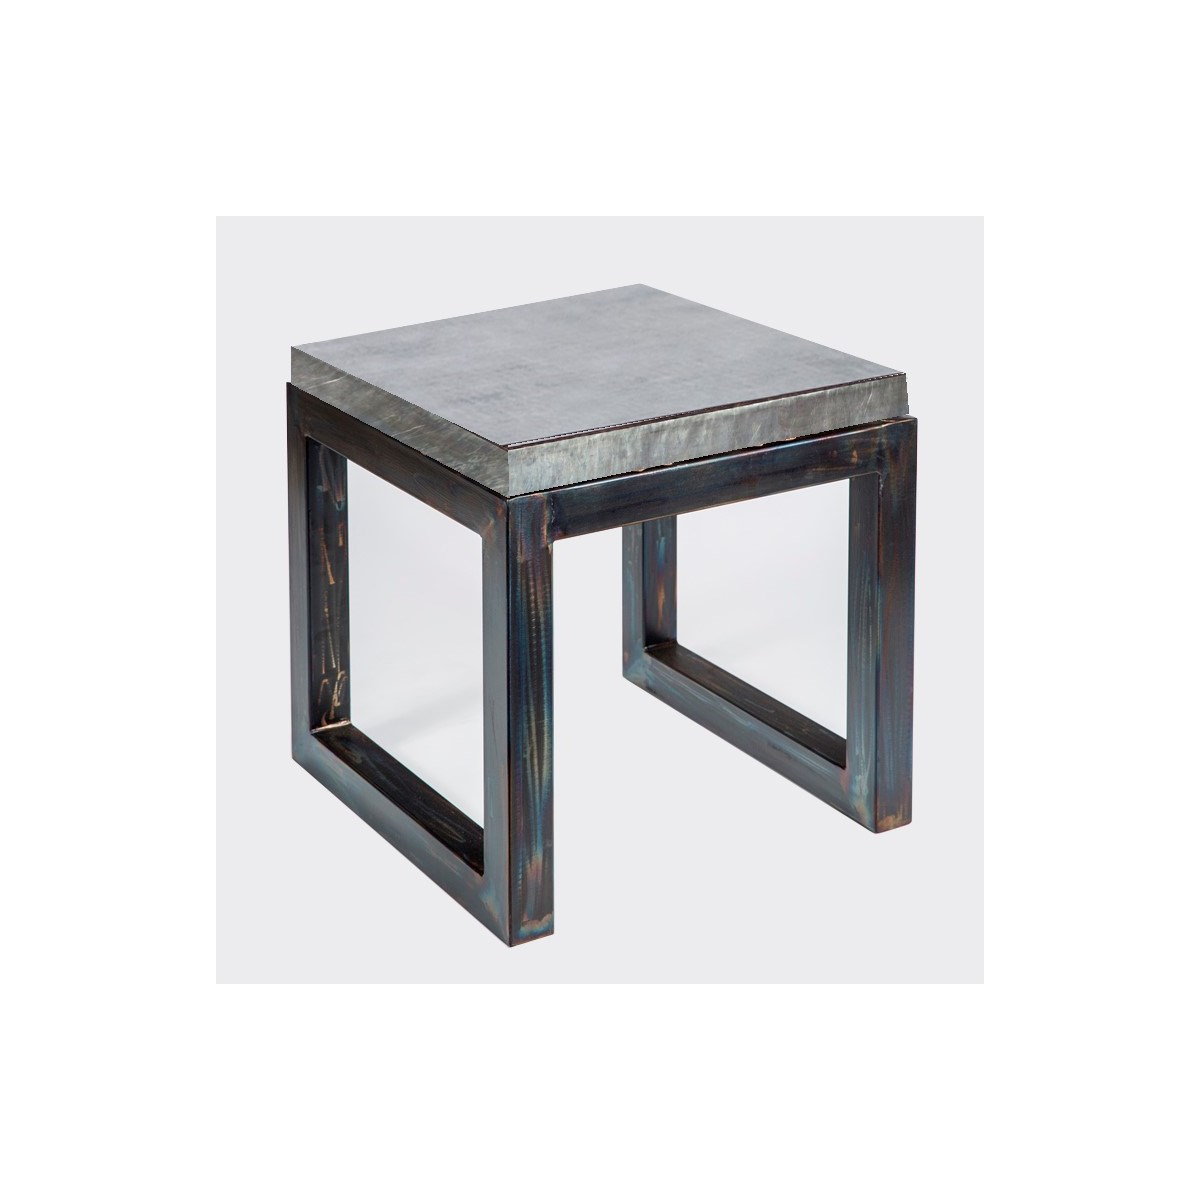 Chester Side Table with Acid Washed Hammered Zinc Top